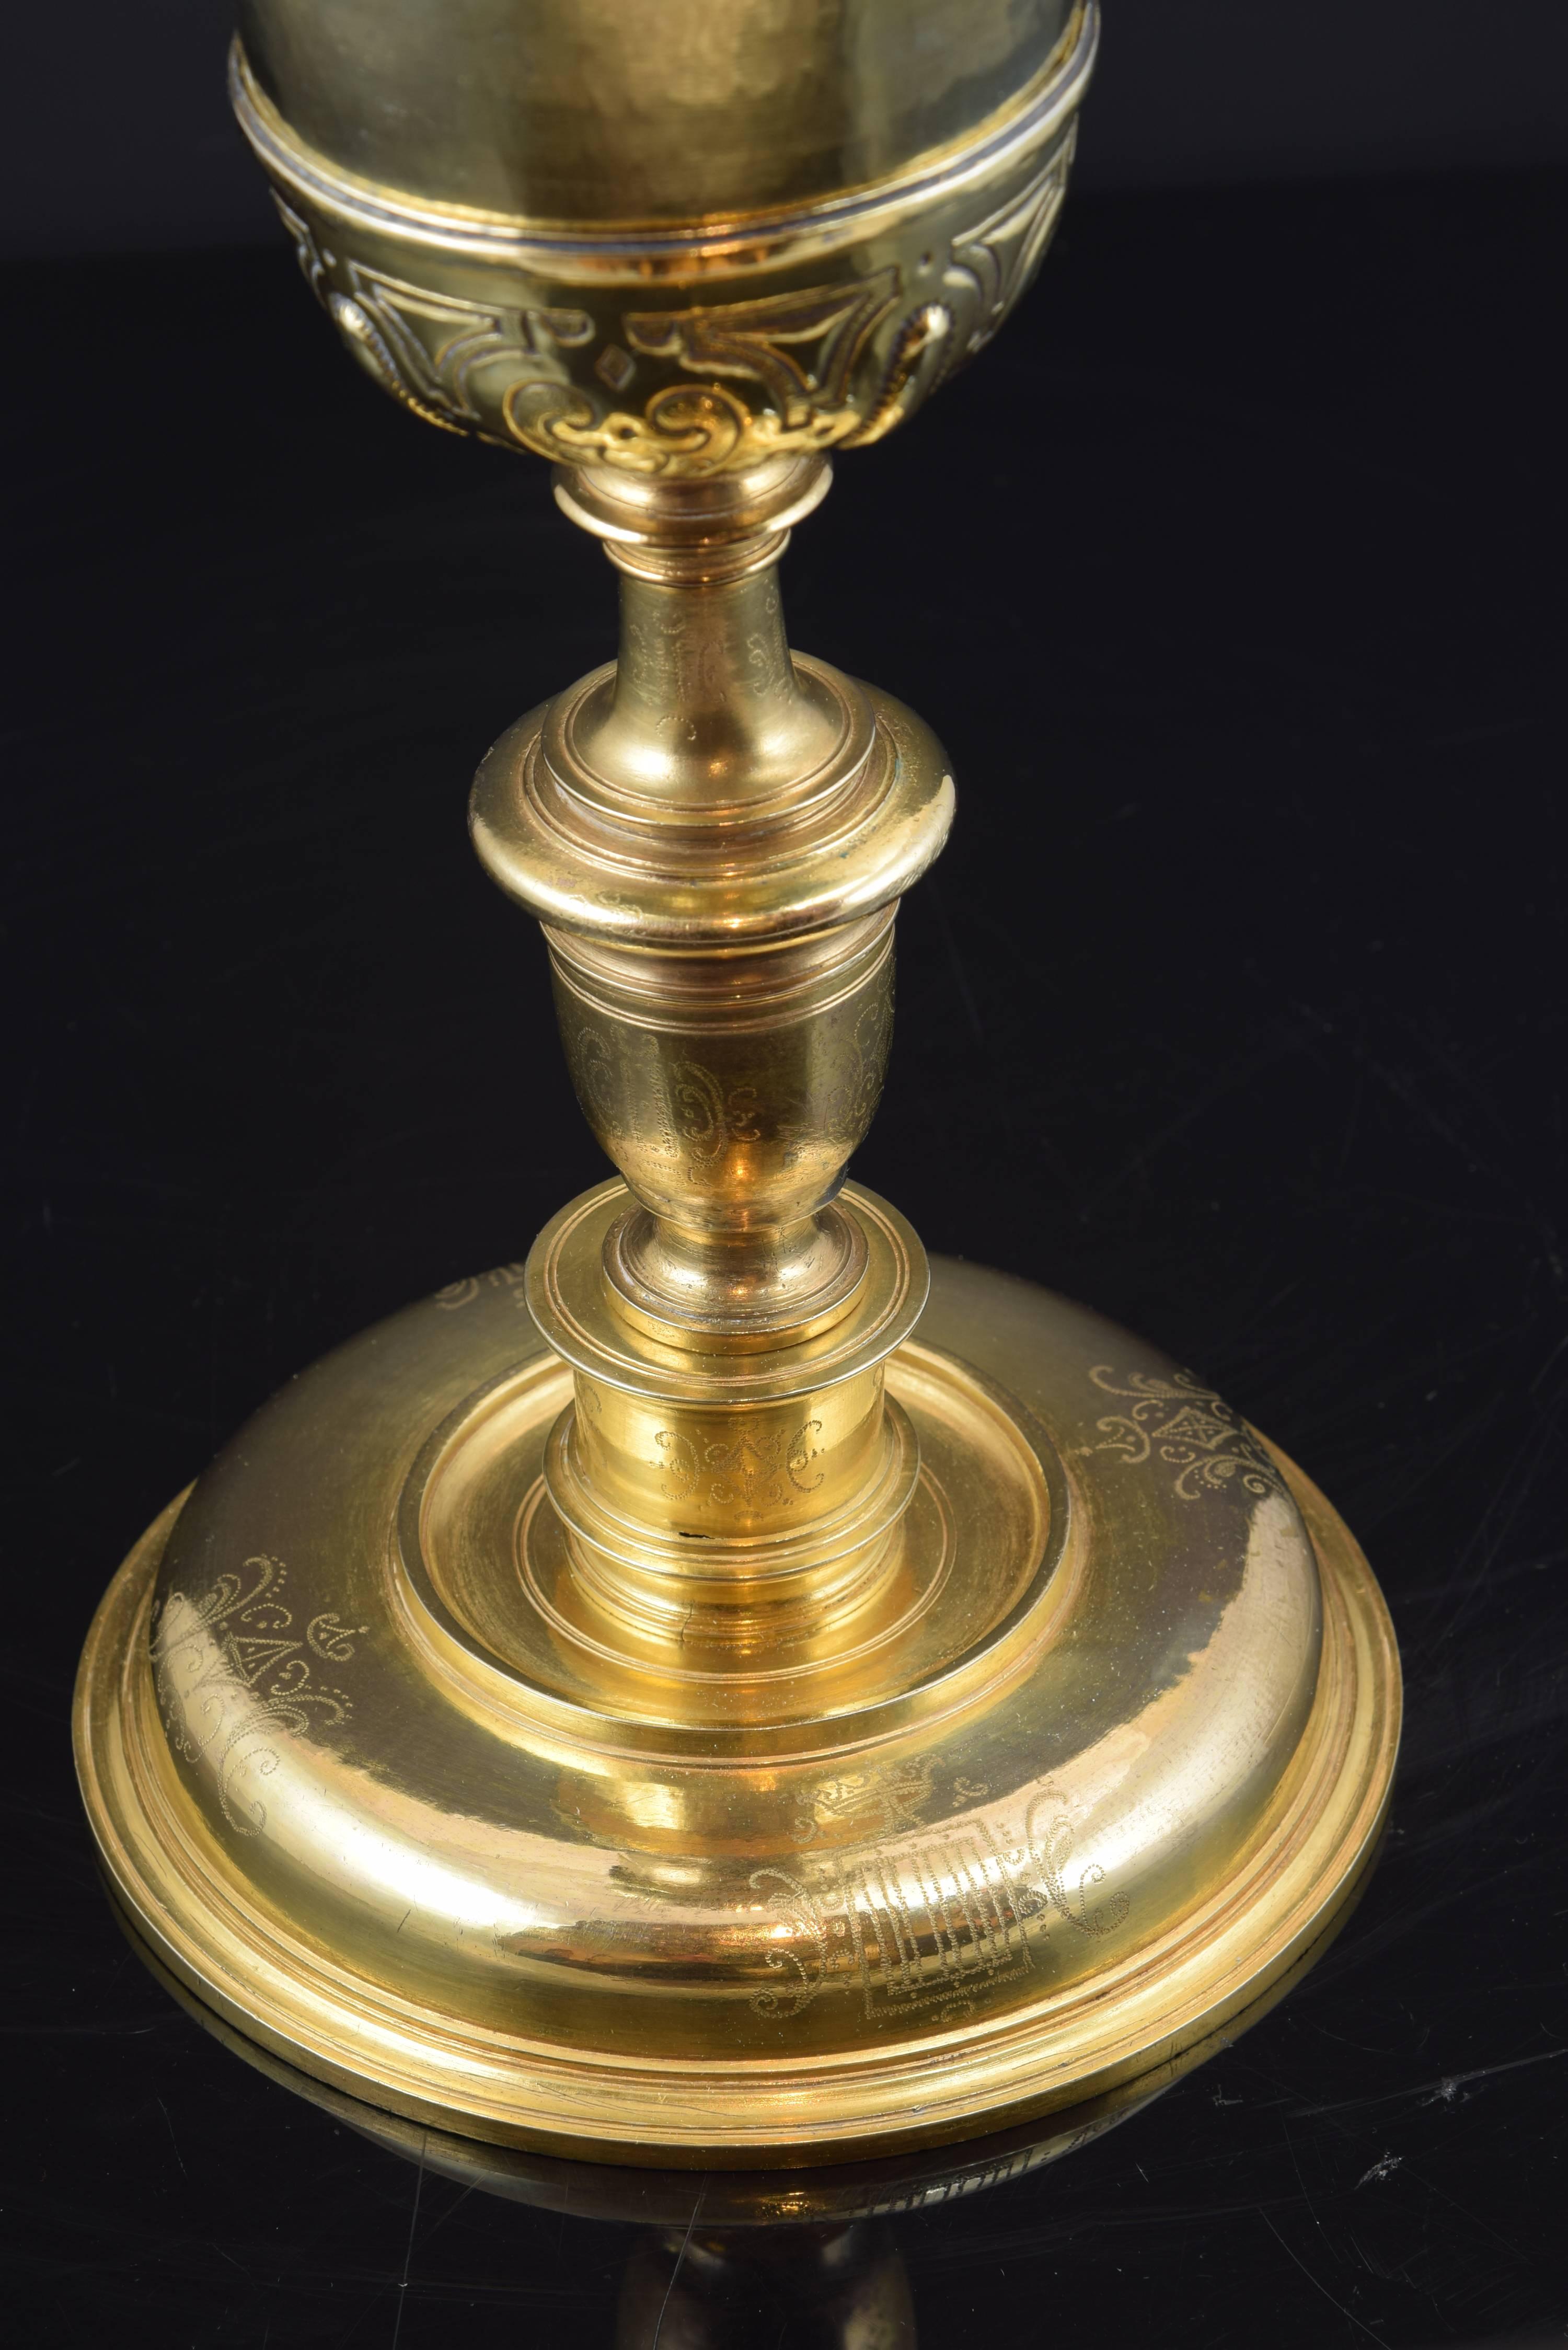 Baroque Chalice, Gilt Bronze and Gilt Silver with Restorations, Spain, 17th Century